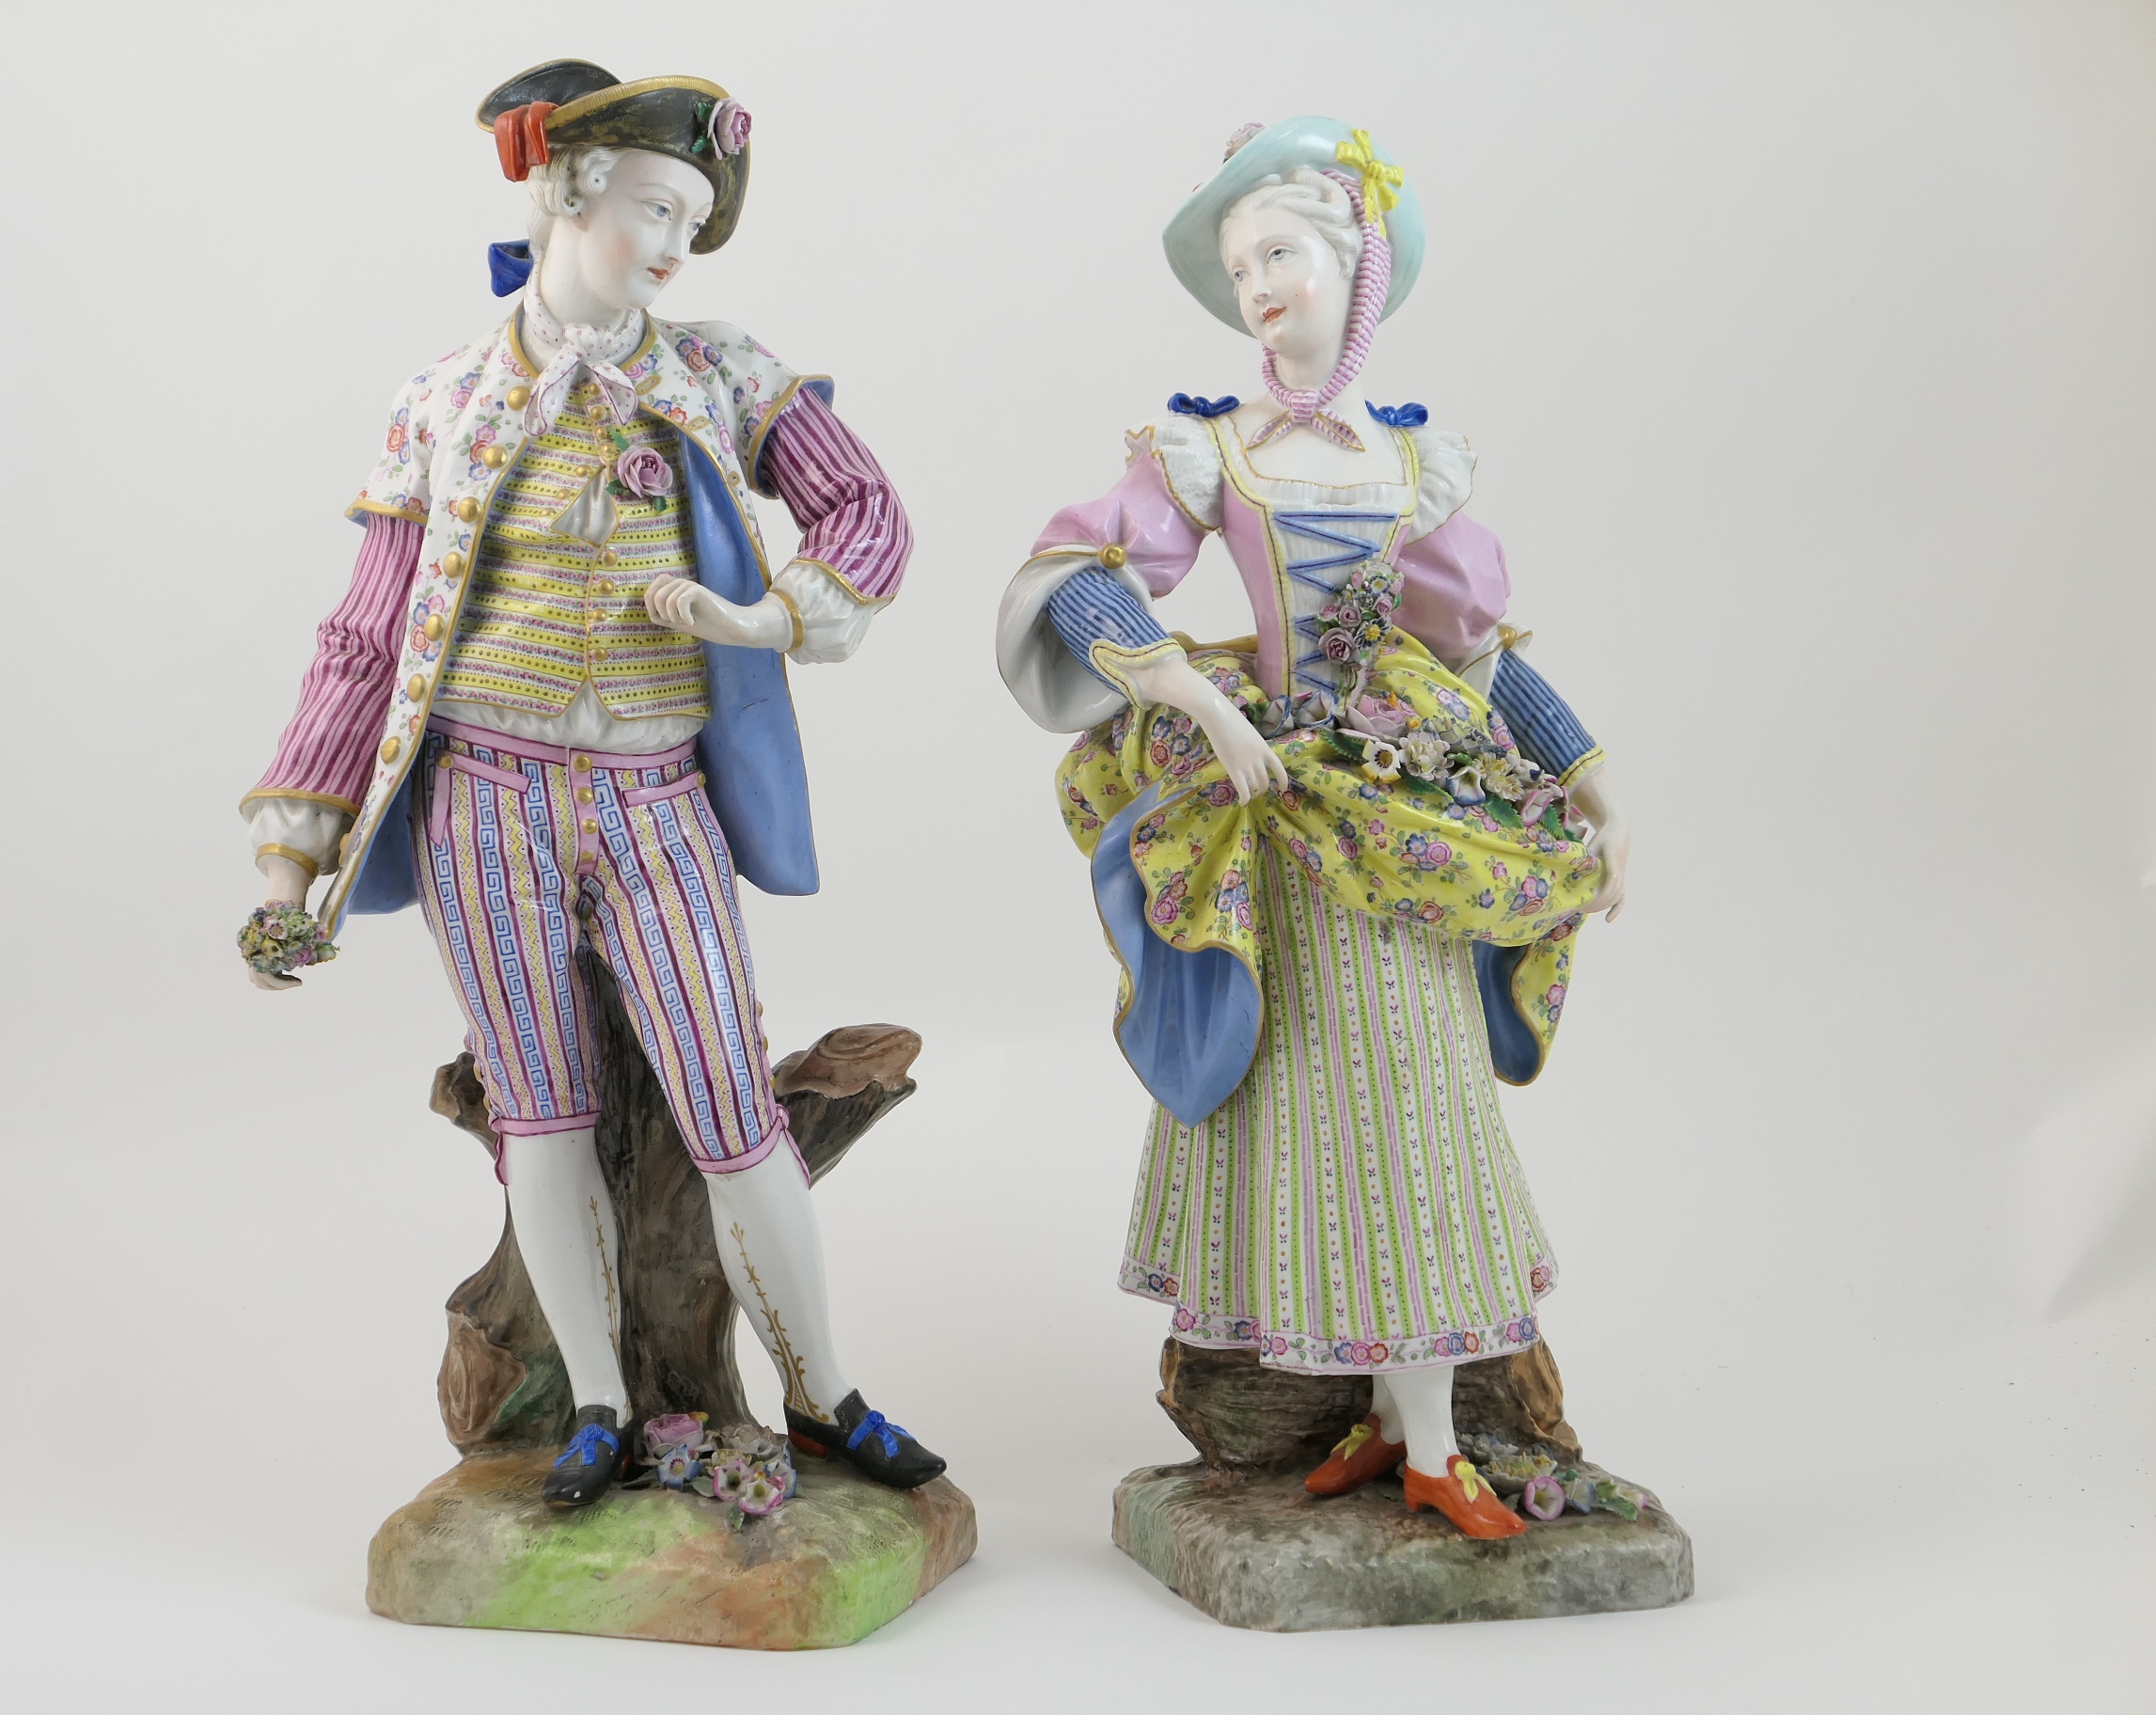 Pair of Dresden porcelain figures of gardeners, after Meissen, circa 1870, each modelled in 18th